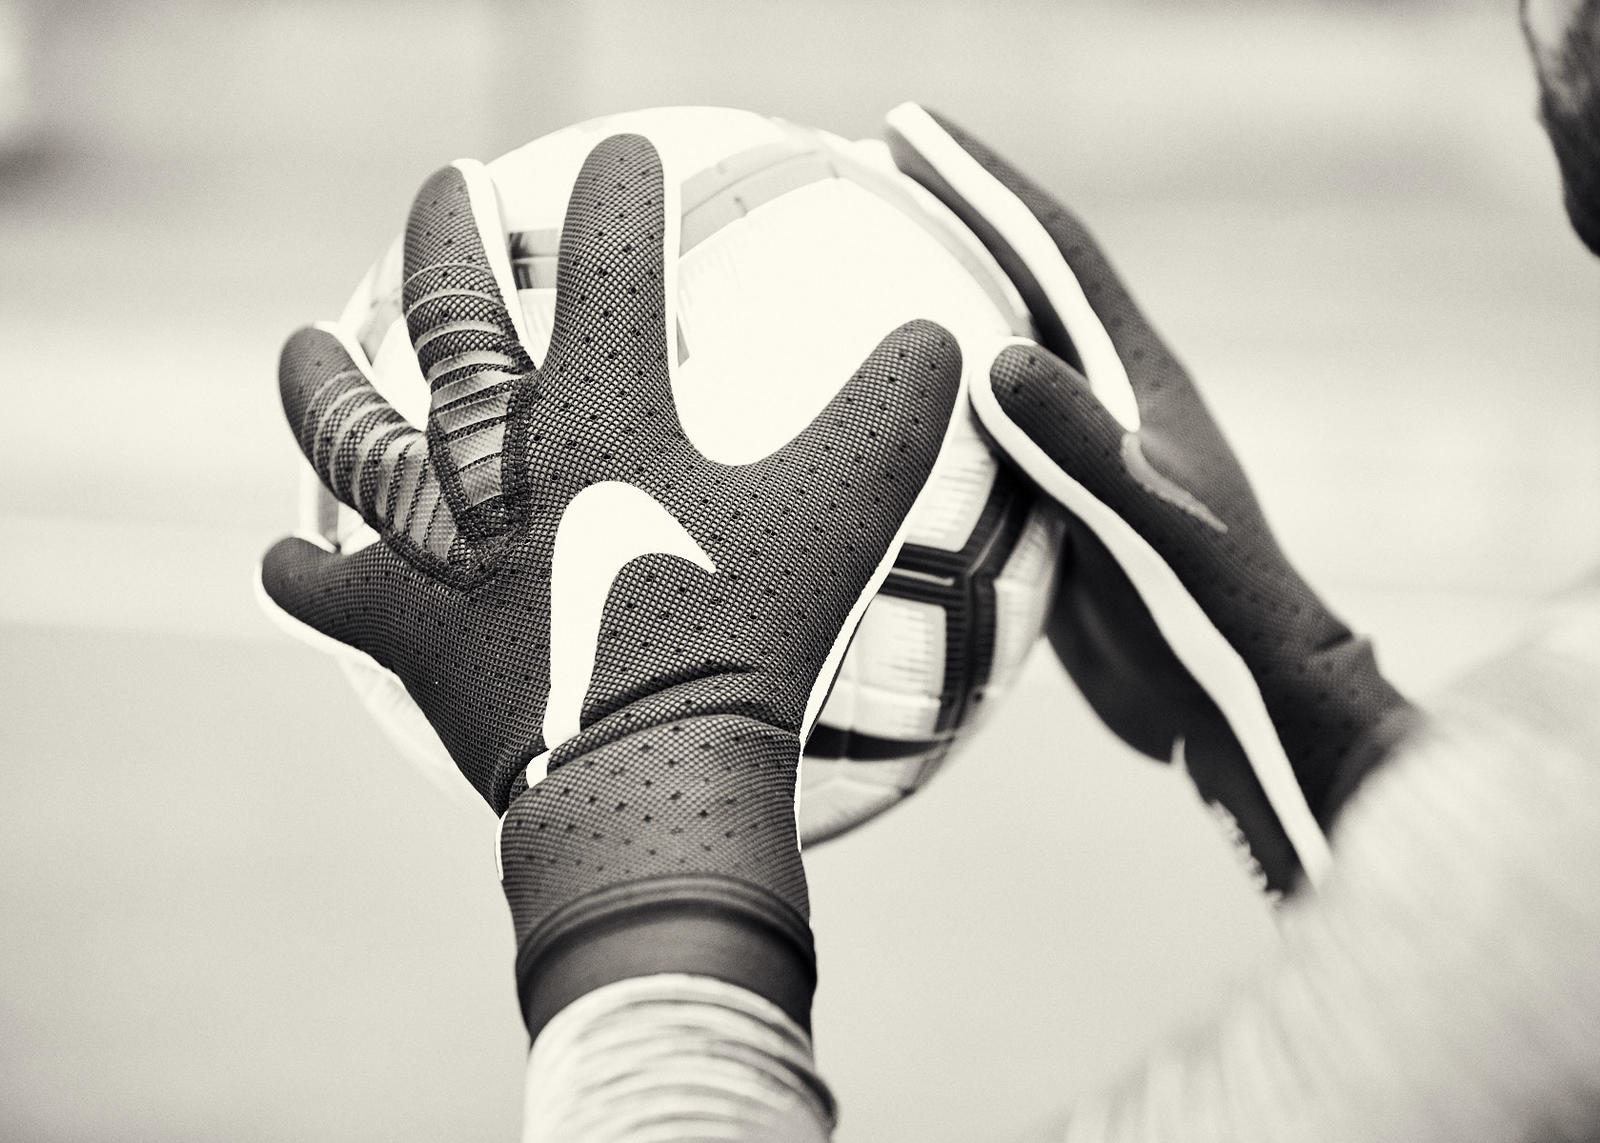 Soccer Gloves for Goalies and Players To Be At Their Best